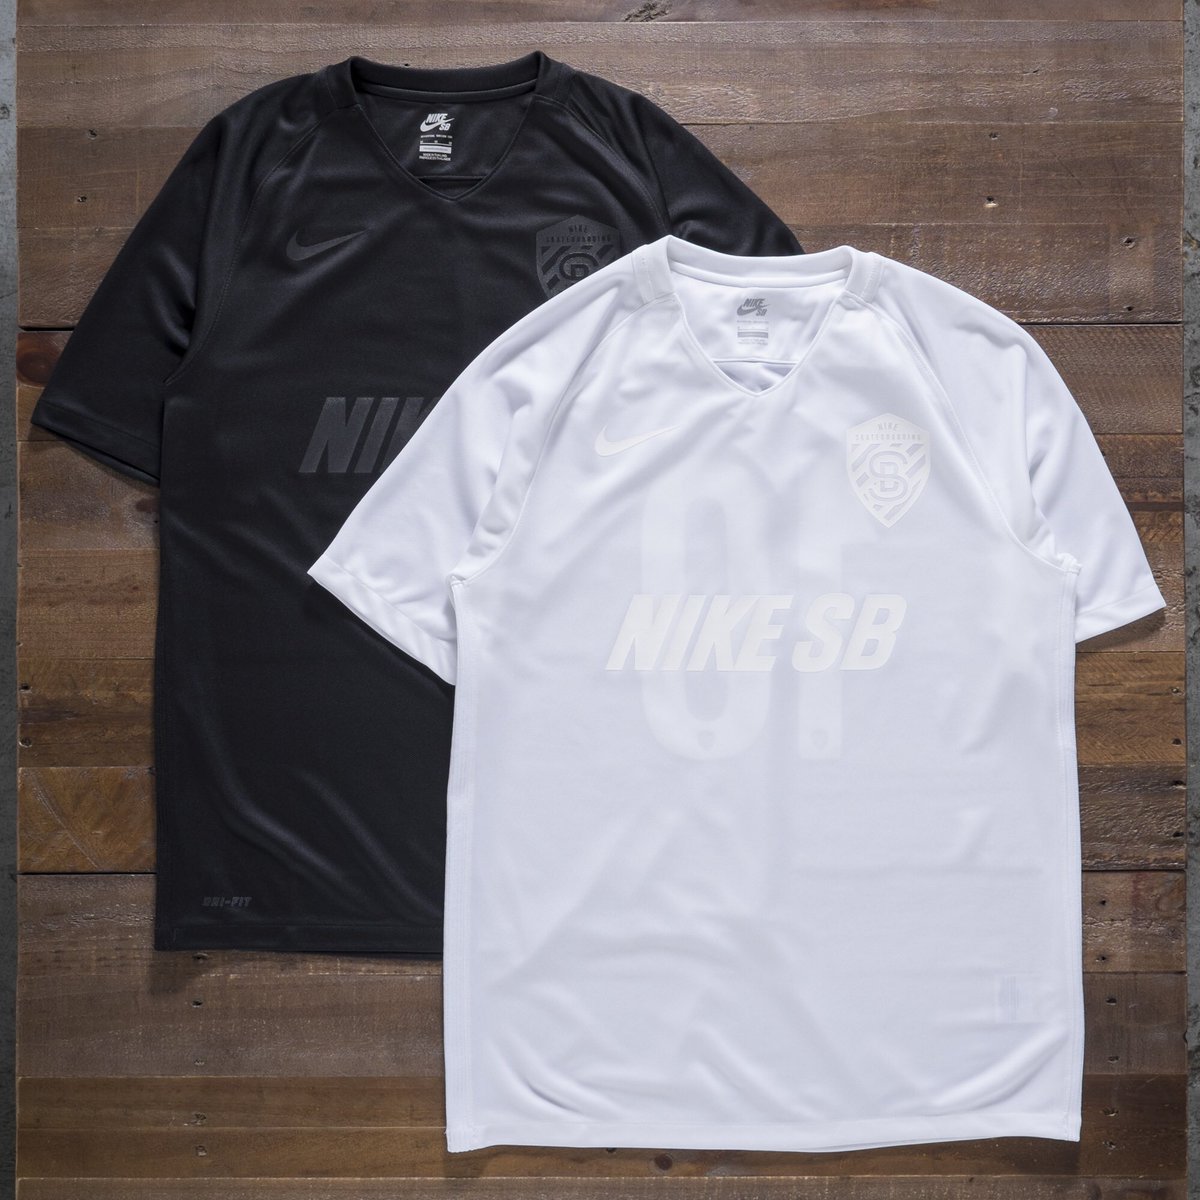 Undefeated Nike Sb X Fb Footie Jersey Available Now At Undefeated La Brea And T Co Rphv7zp2fc